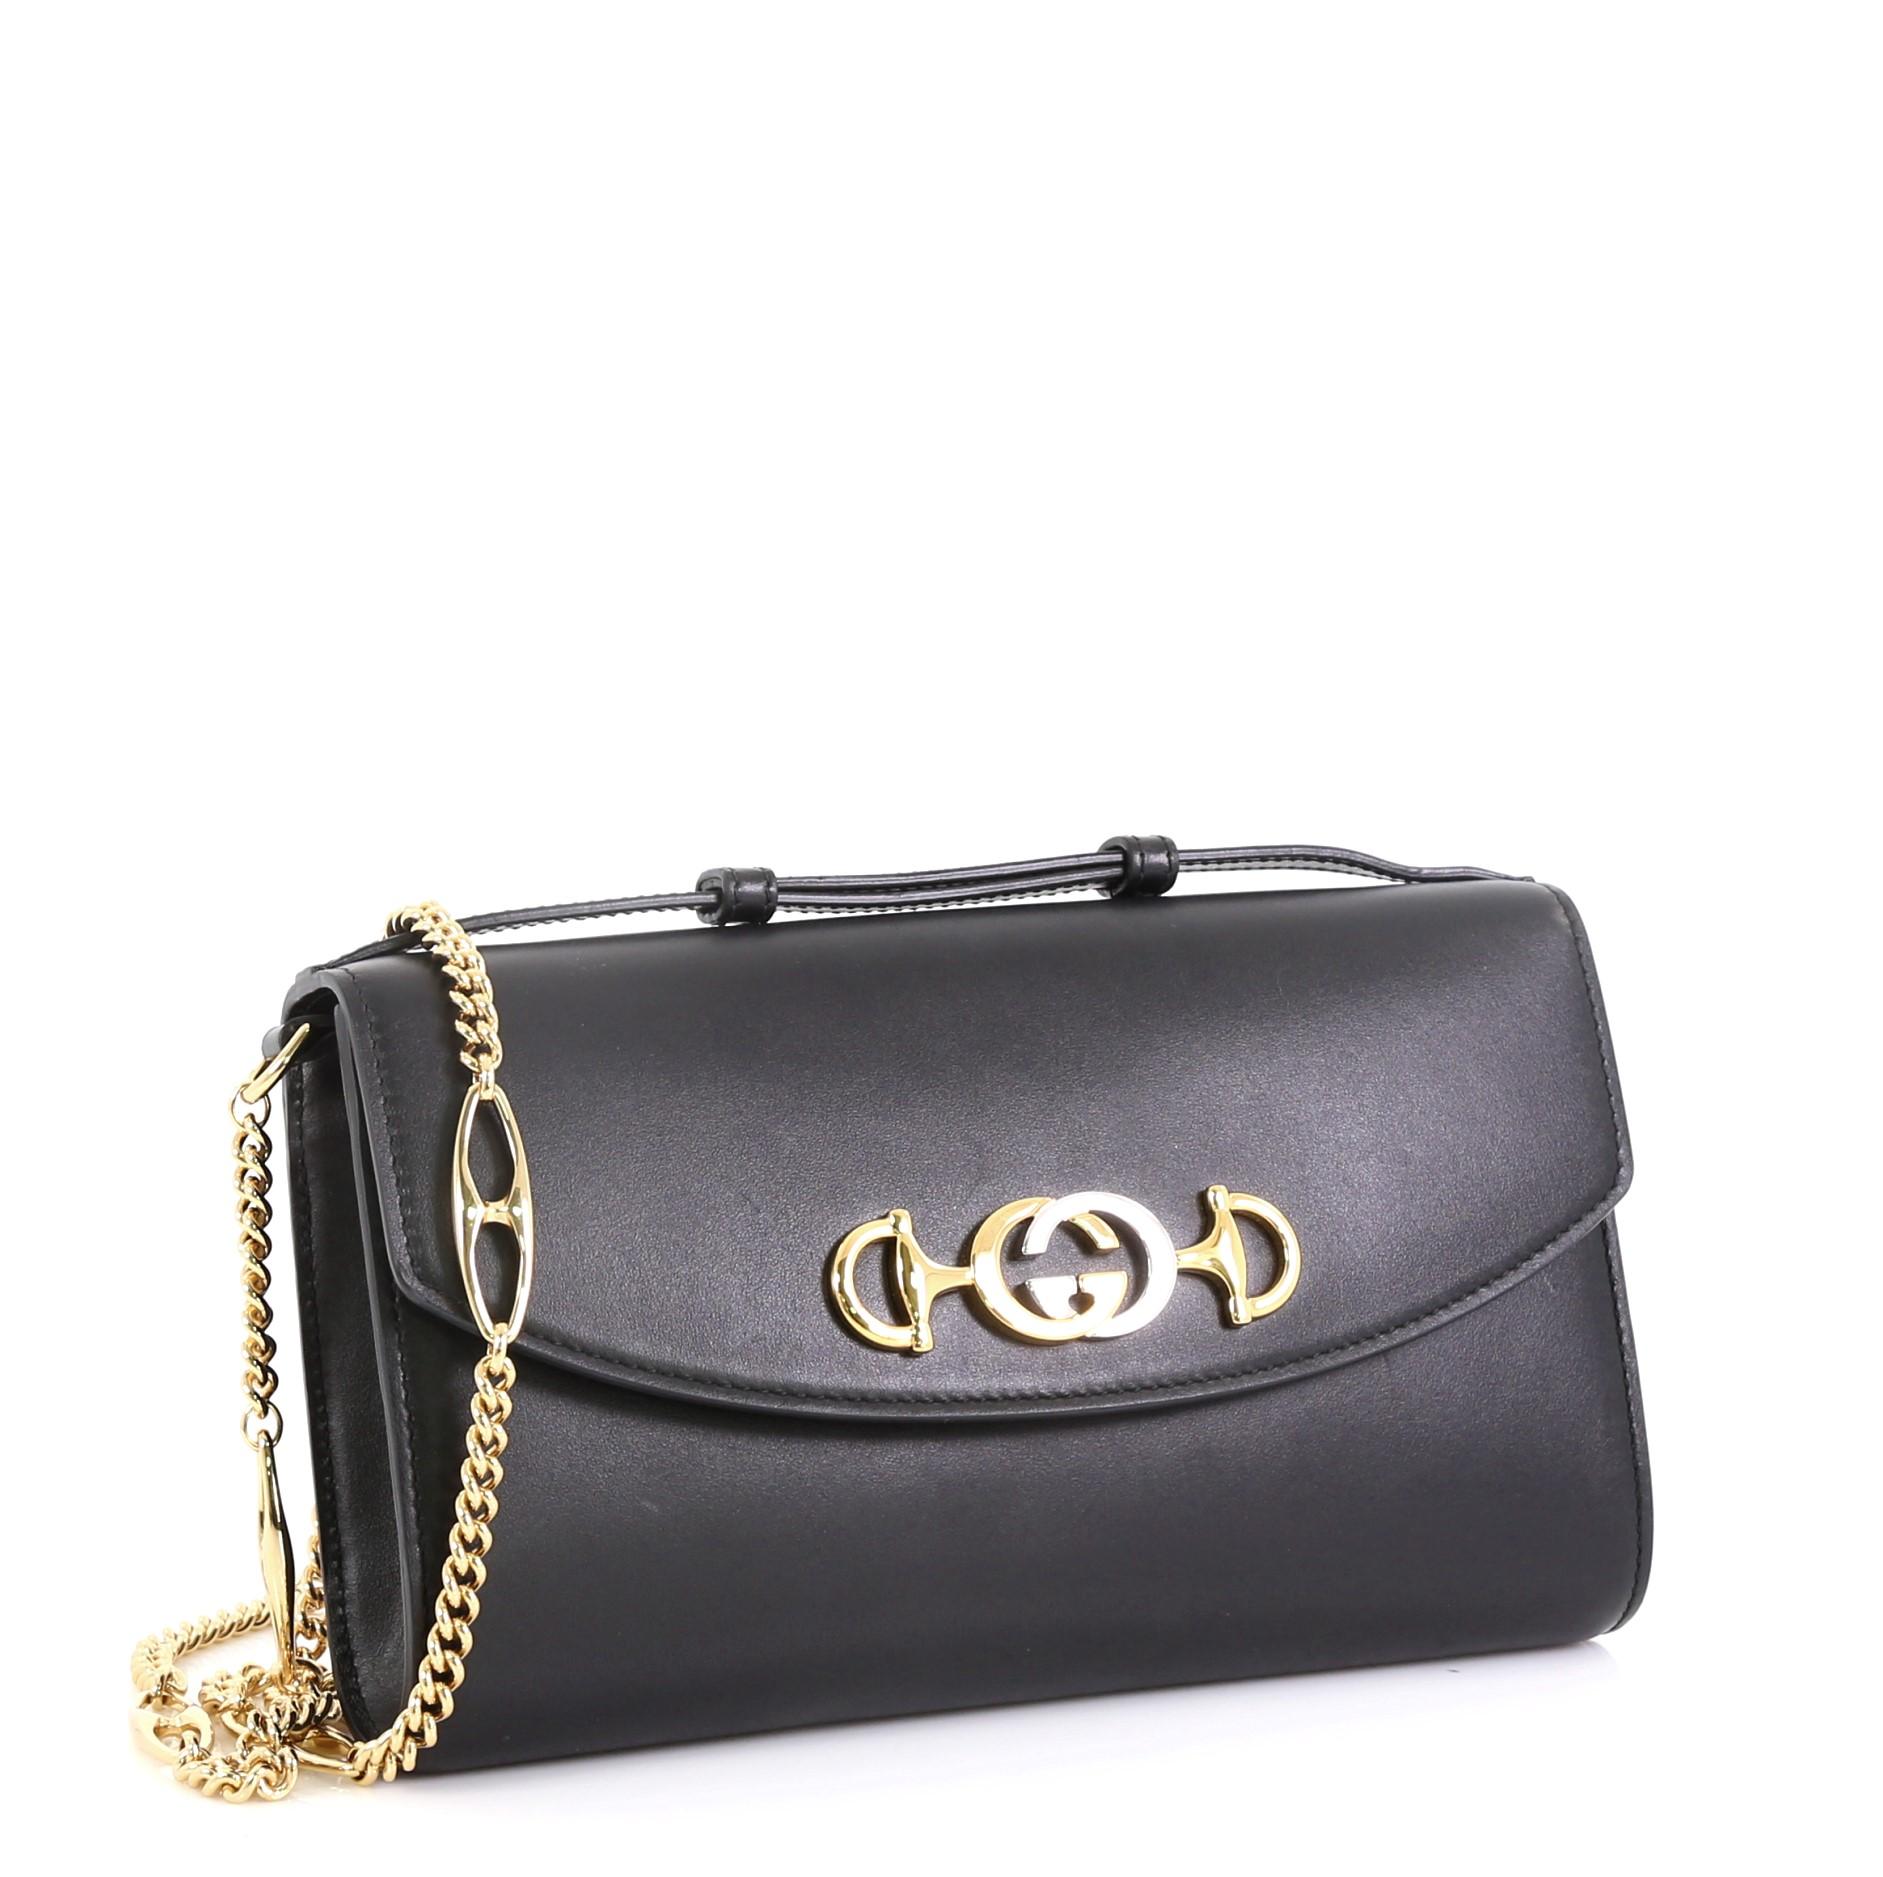 This Gucci Zumi Shoulder Bag Leather Small, crafted in black leather, features adjustable leather handles, Marina chain shoulder strap, interlocking G Horsebit, and gold-tone hardware. Its magnetic snap closure opens to a red leather interior with